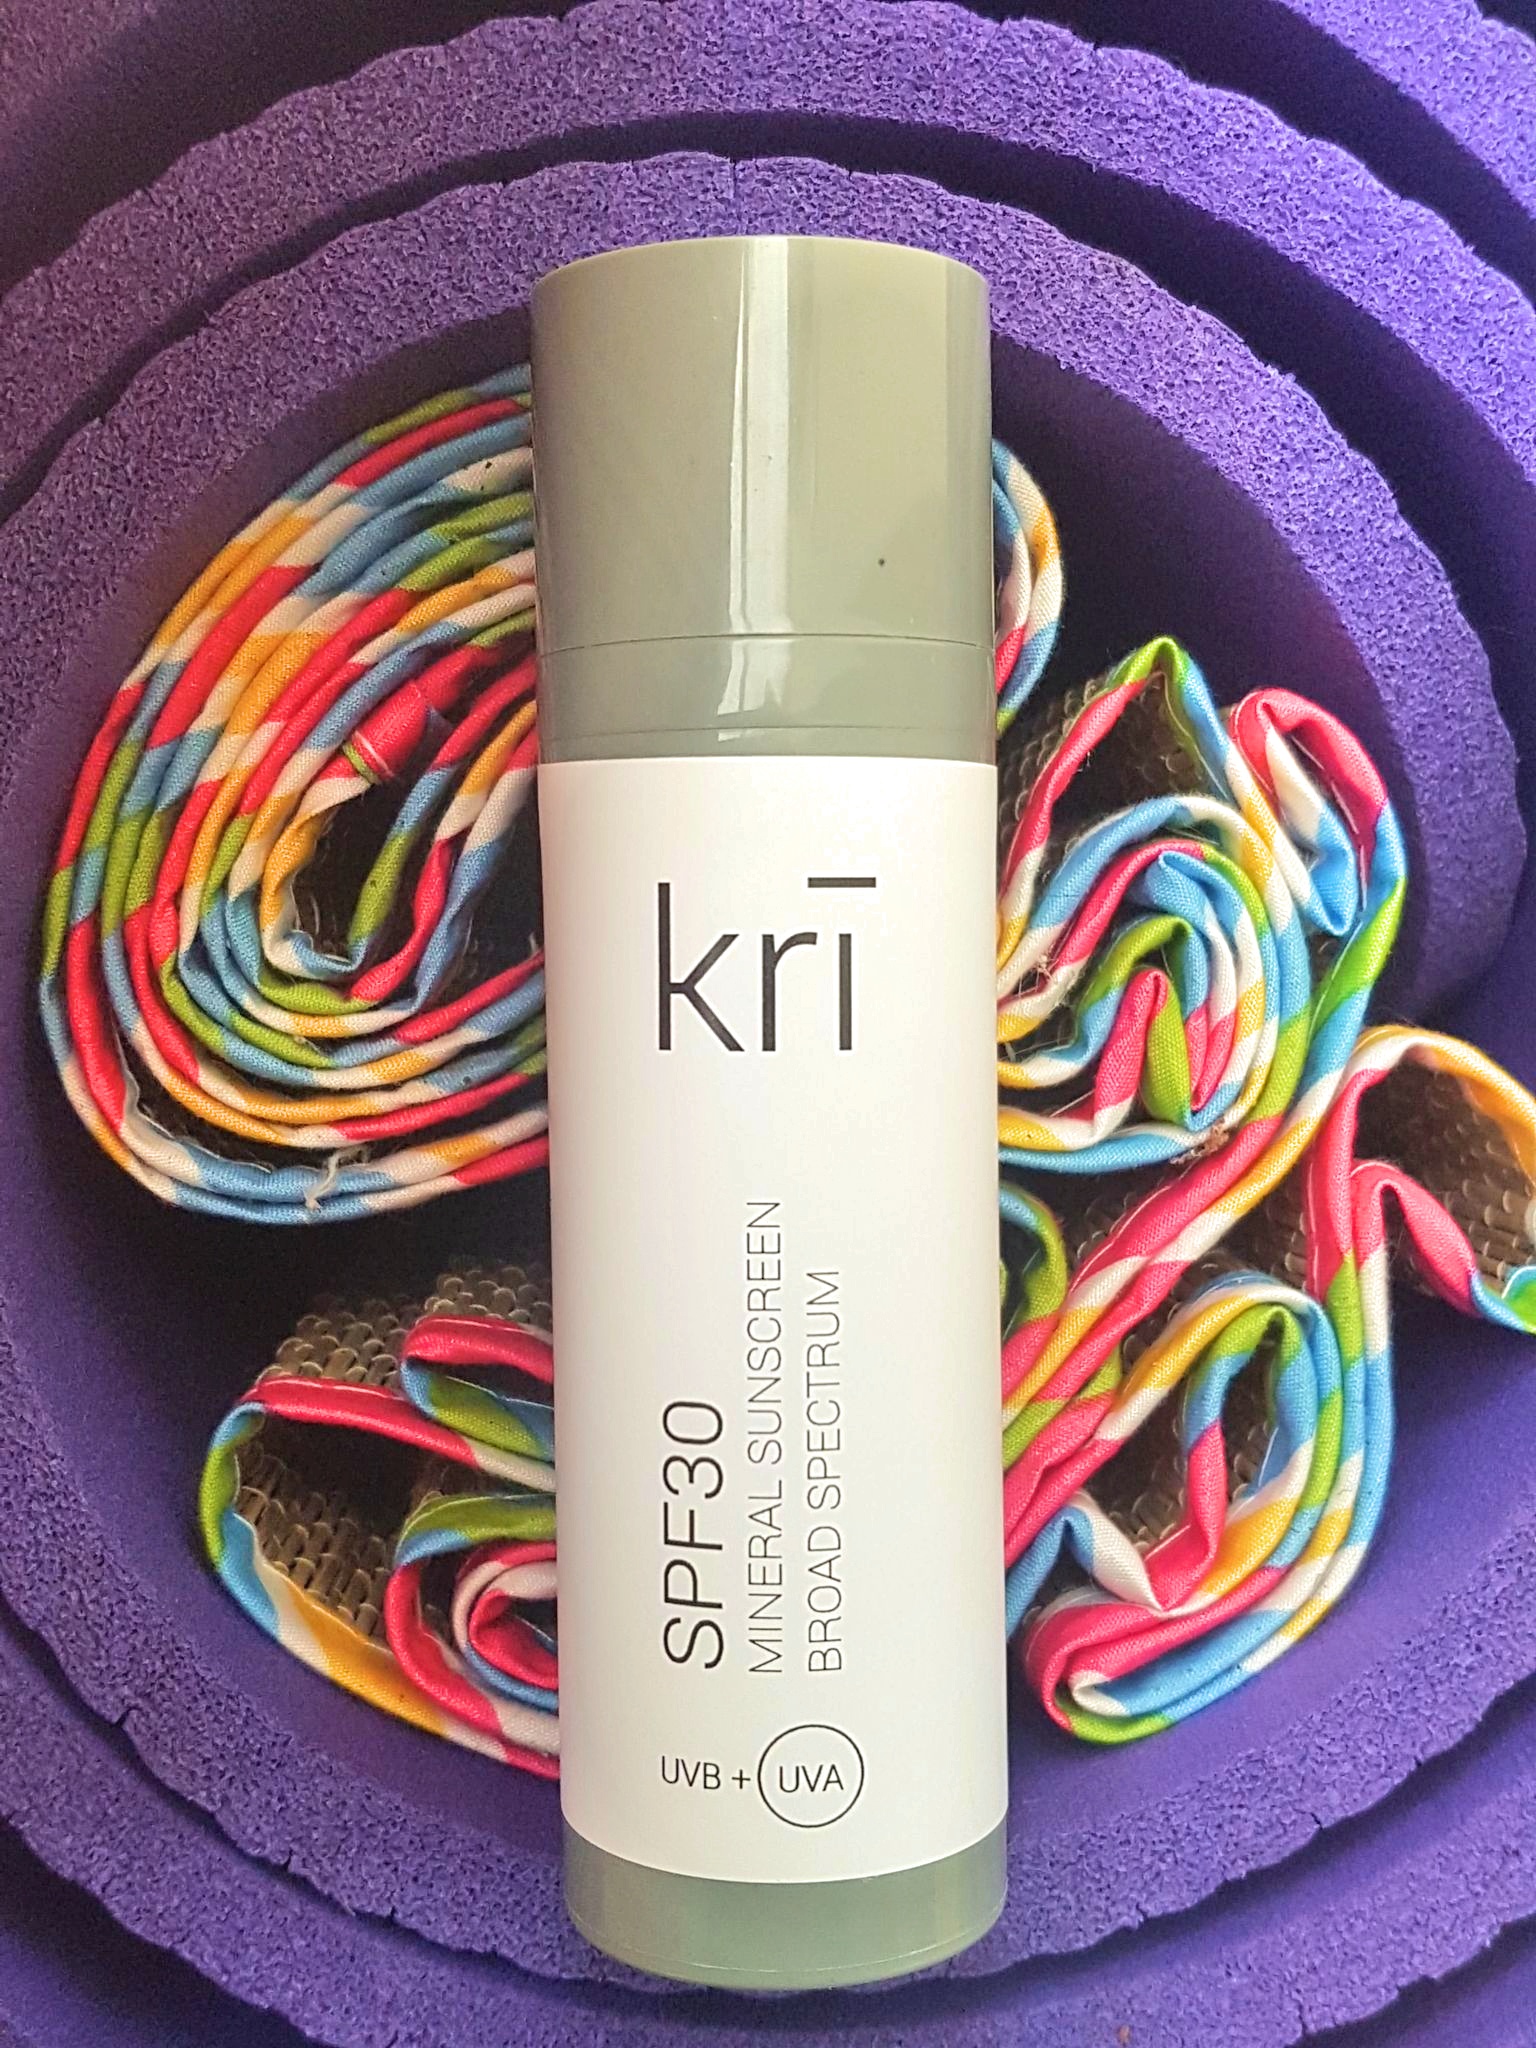 Kri Skincare SPF30 Mineral Sunscreen on top of colourful rolled up mats